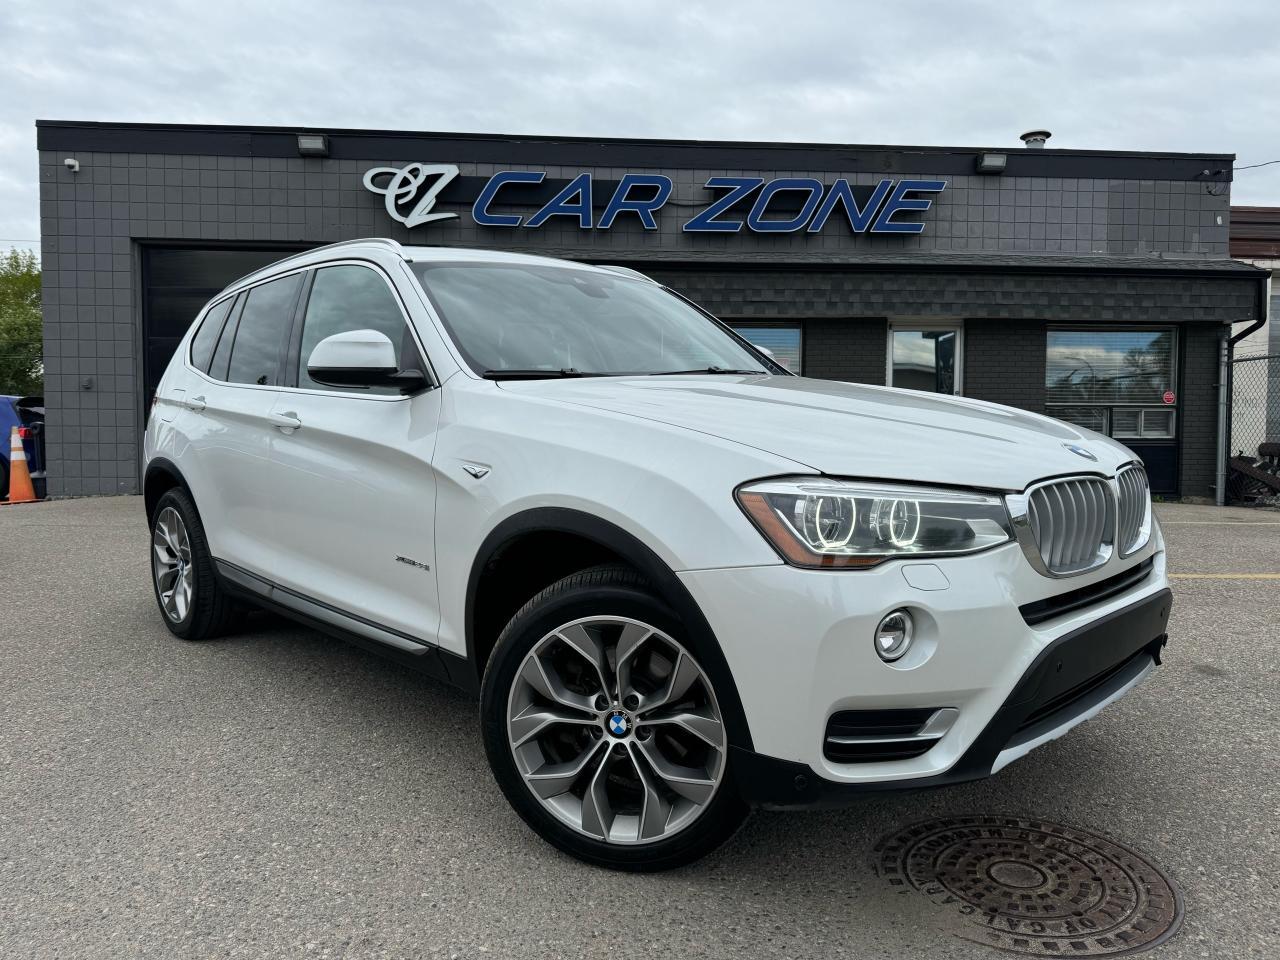 2016 BMW X3 28i XDrive No Accidents Inspected